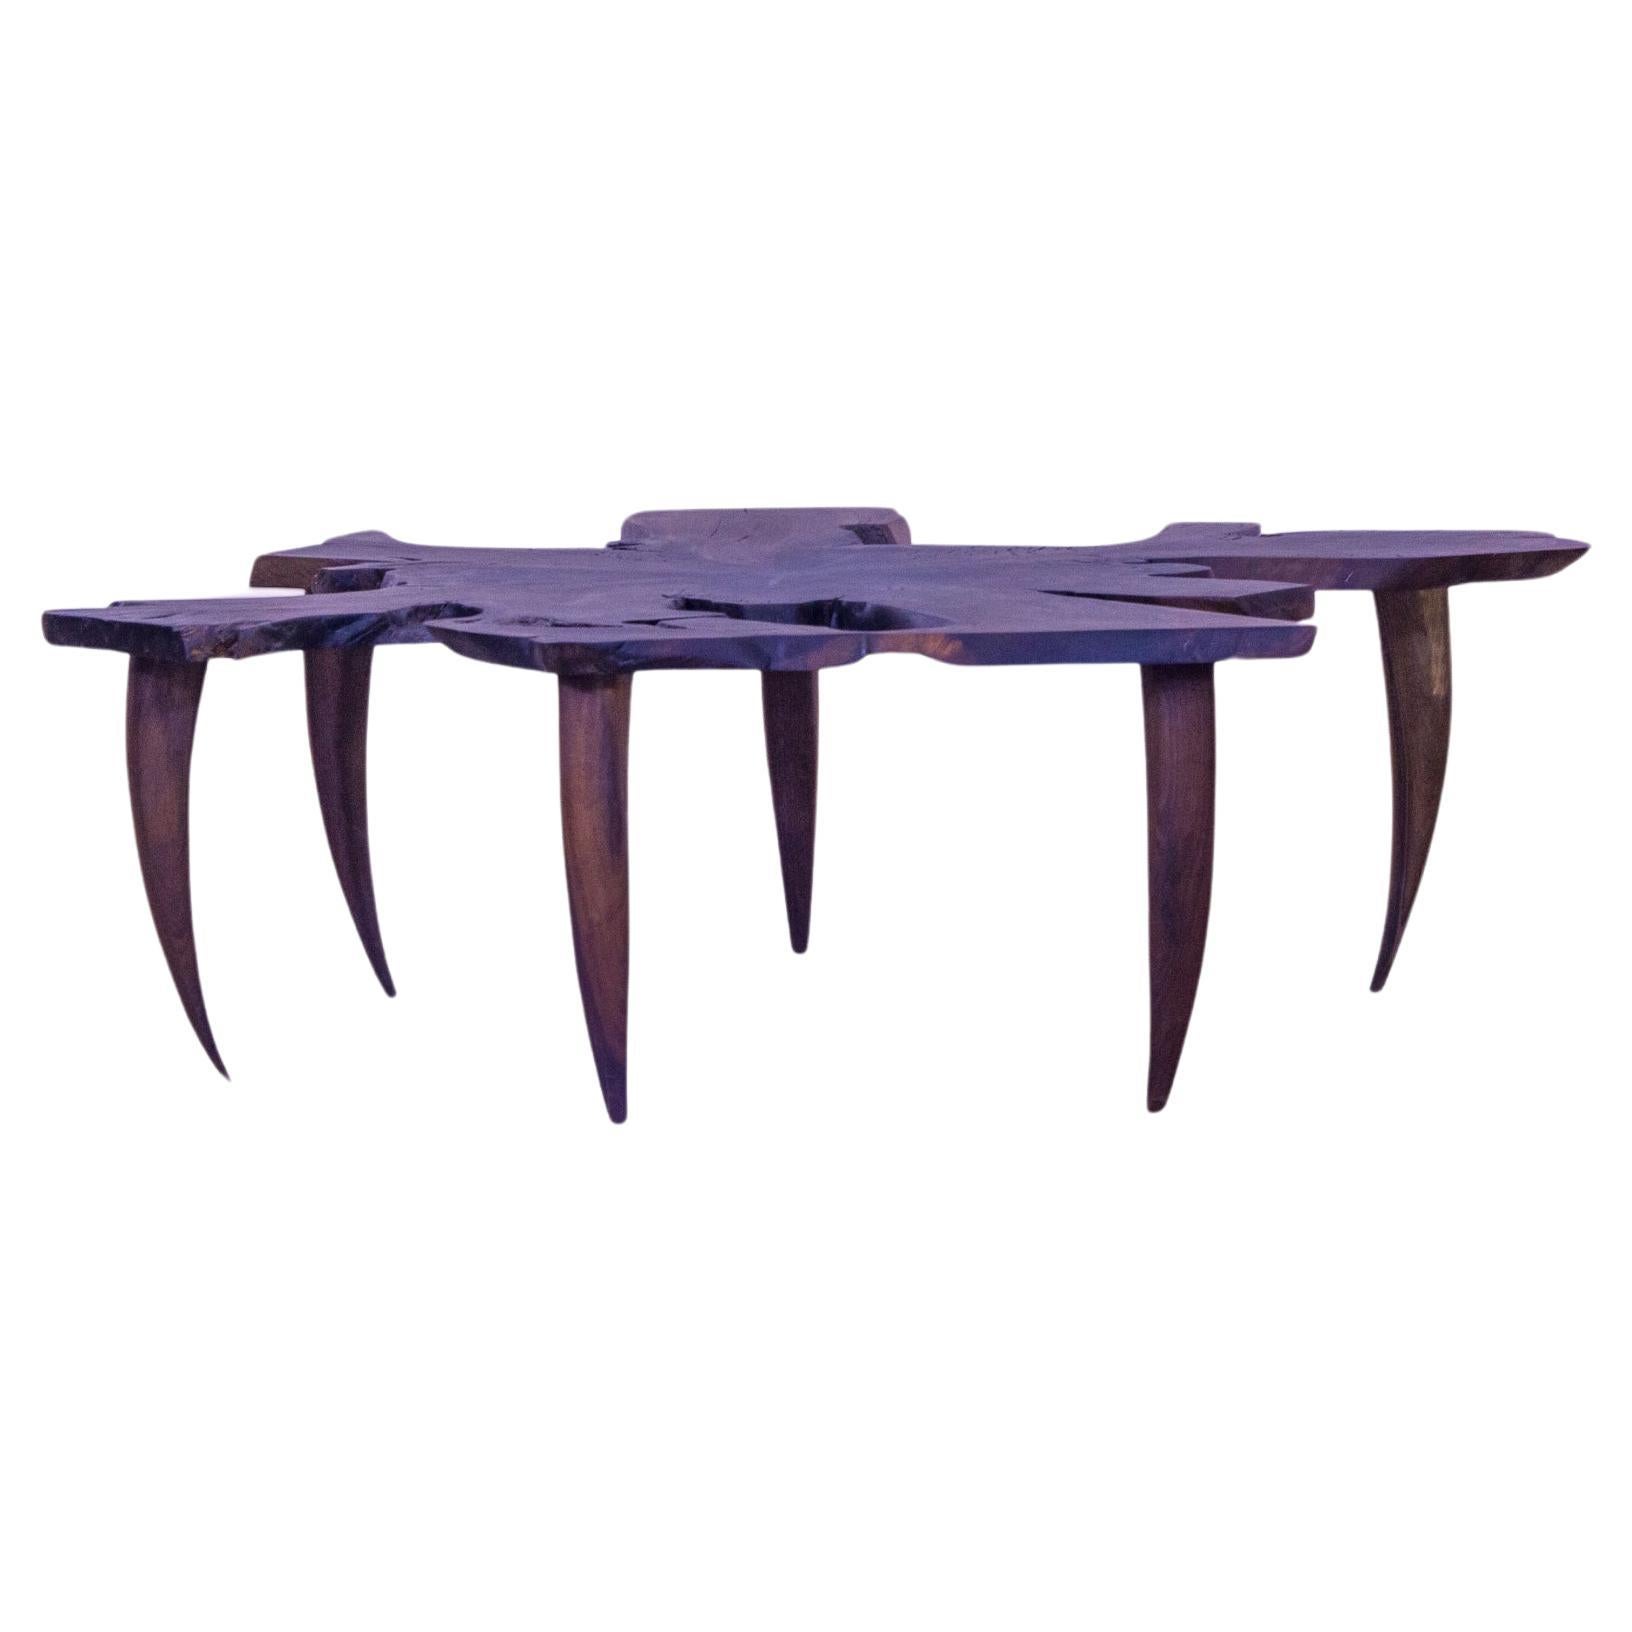 Wacanda table by Larry Jerome For Sale